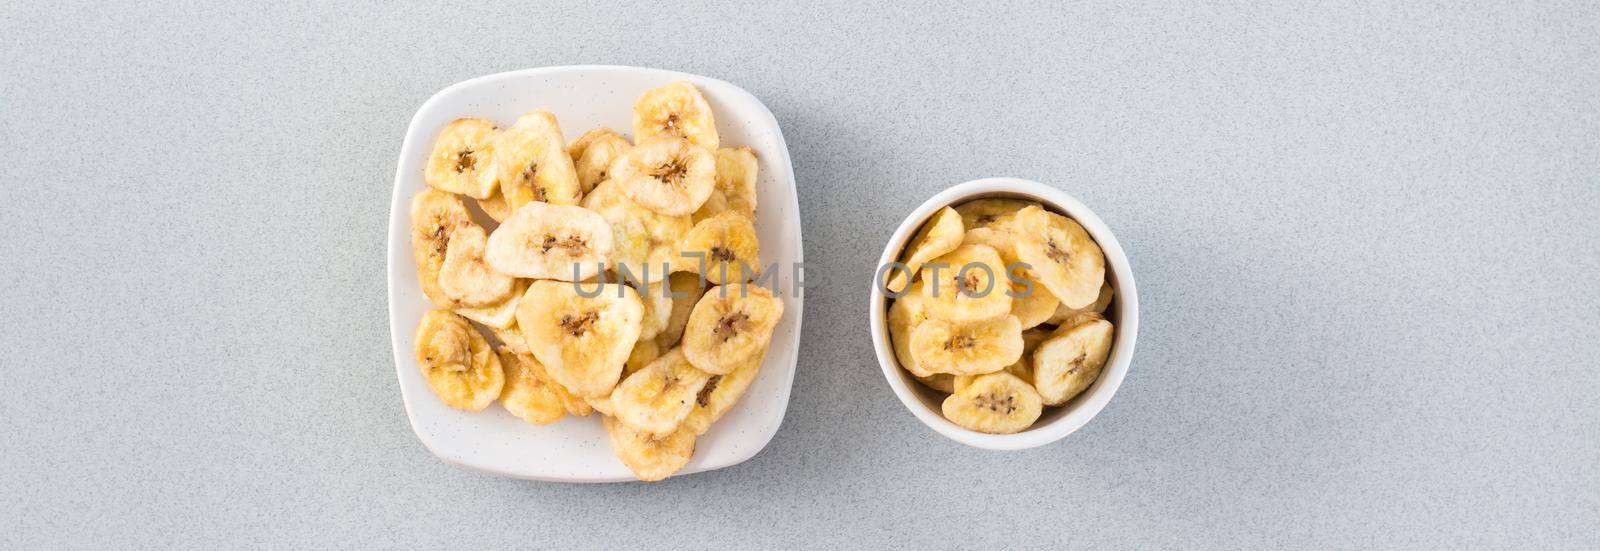 Baked banana chips in a white bowl and saucer on the table. Fast food. Web banner. Top view by Aleruana